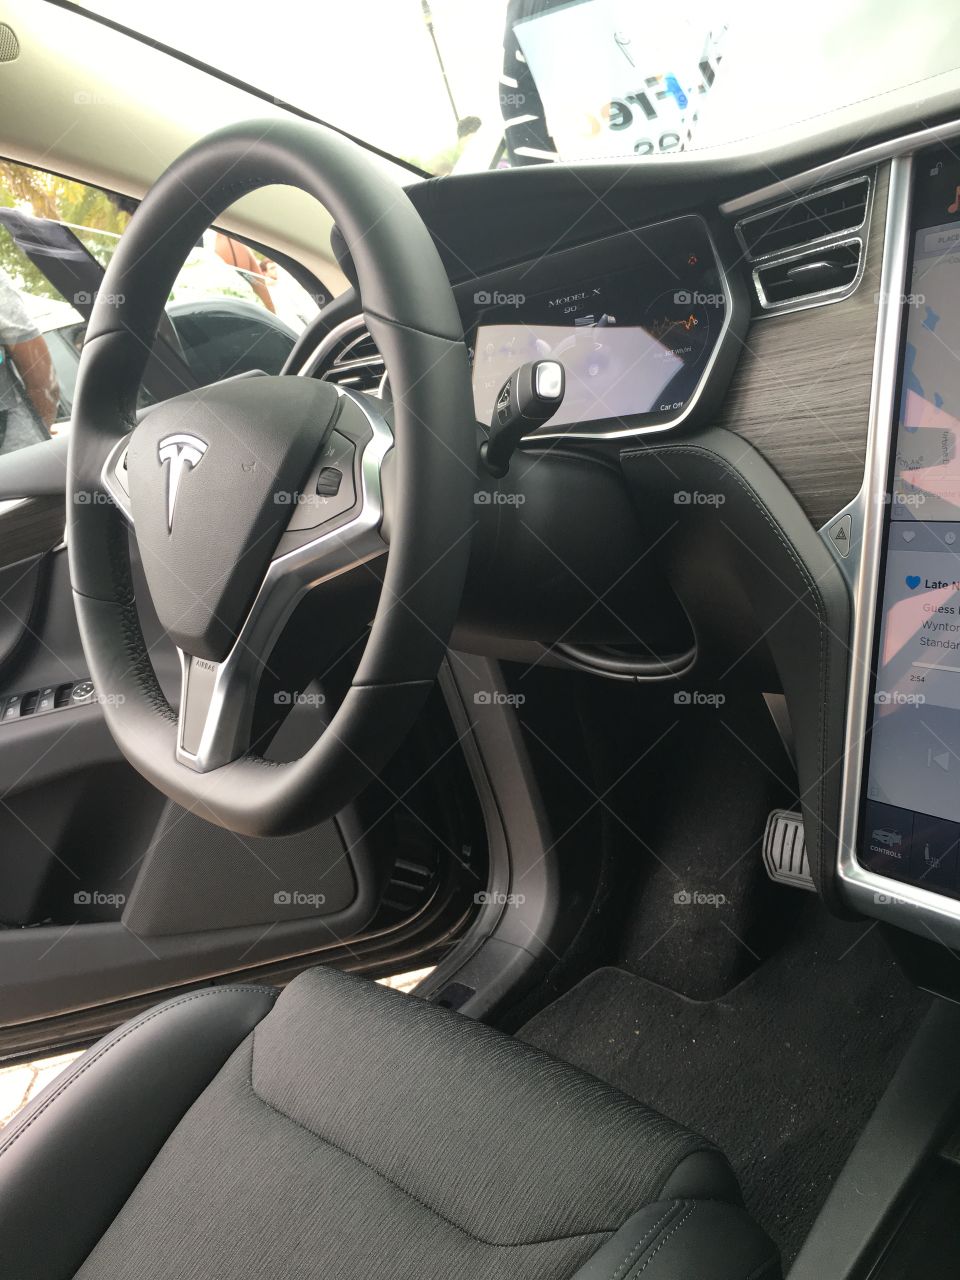 Steering wheel of black tesla located at the University of Central Florida.